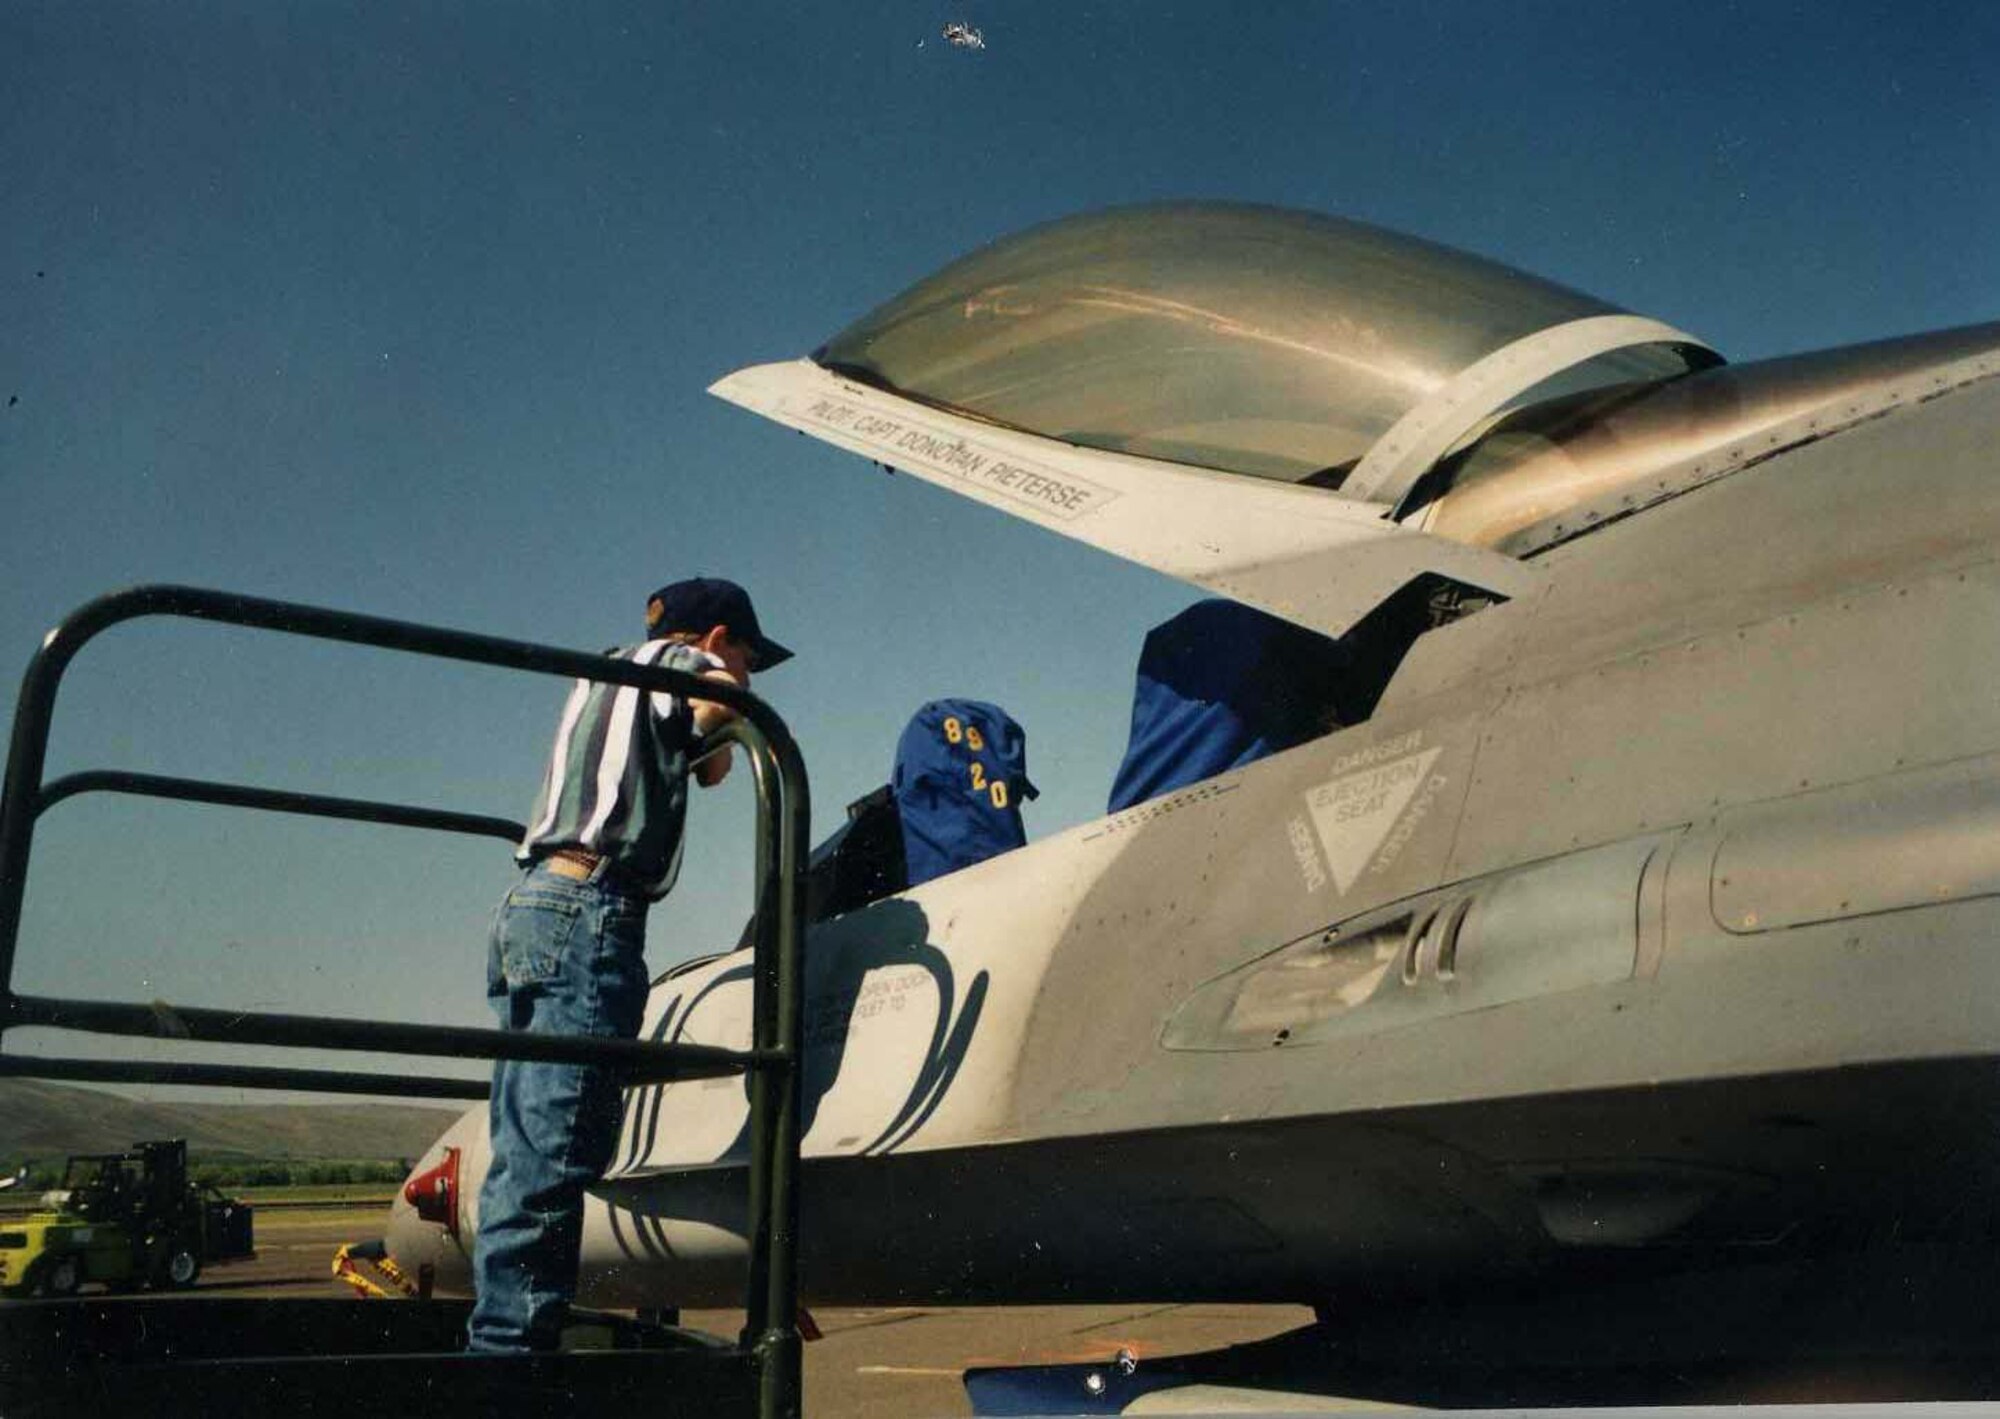 Senior Airman Jeremy Meyers seen here at 9 years old looking into an F-16 at an airshow.